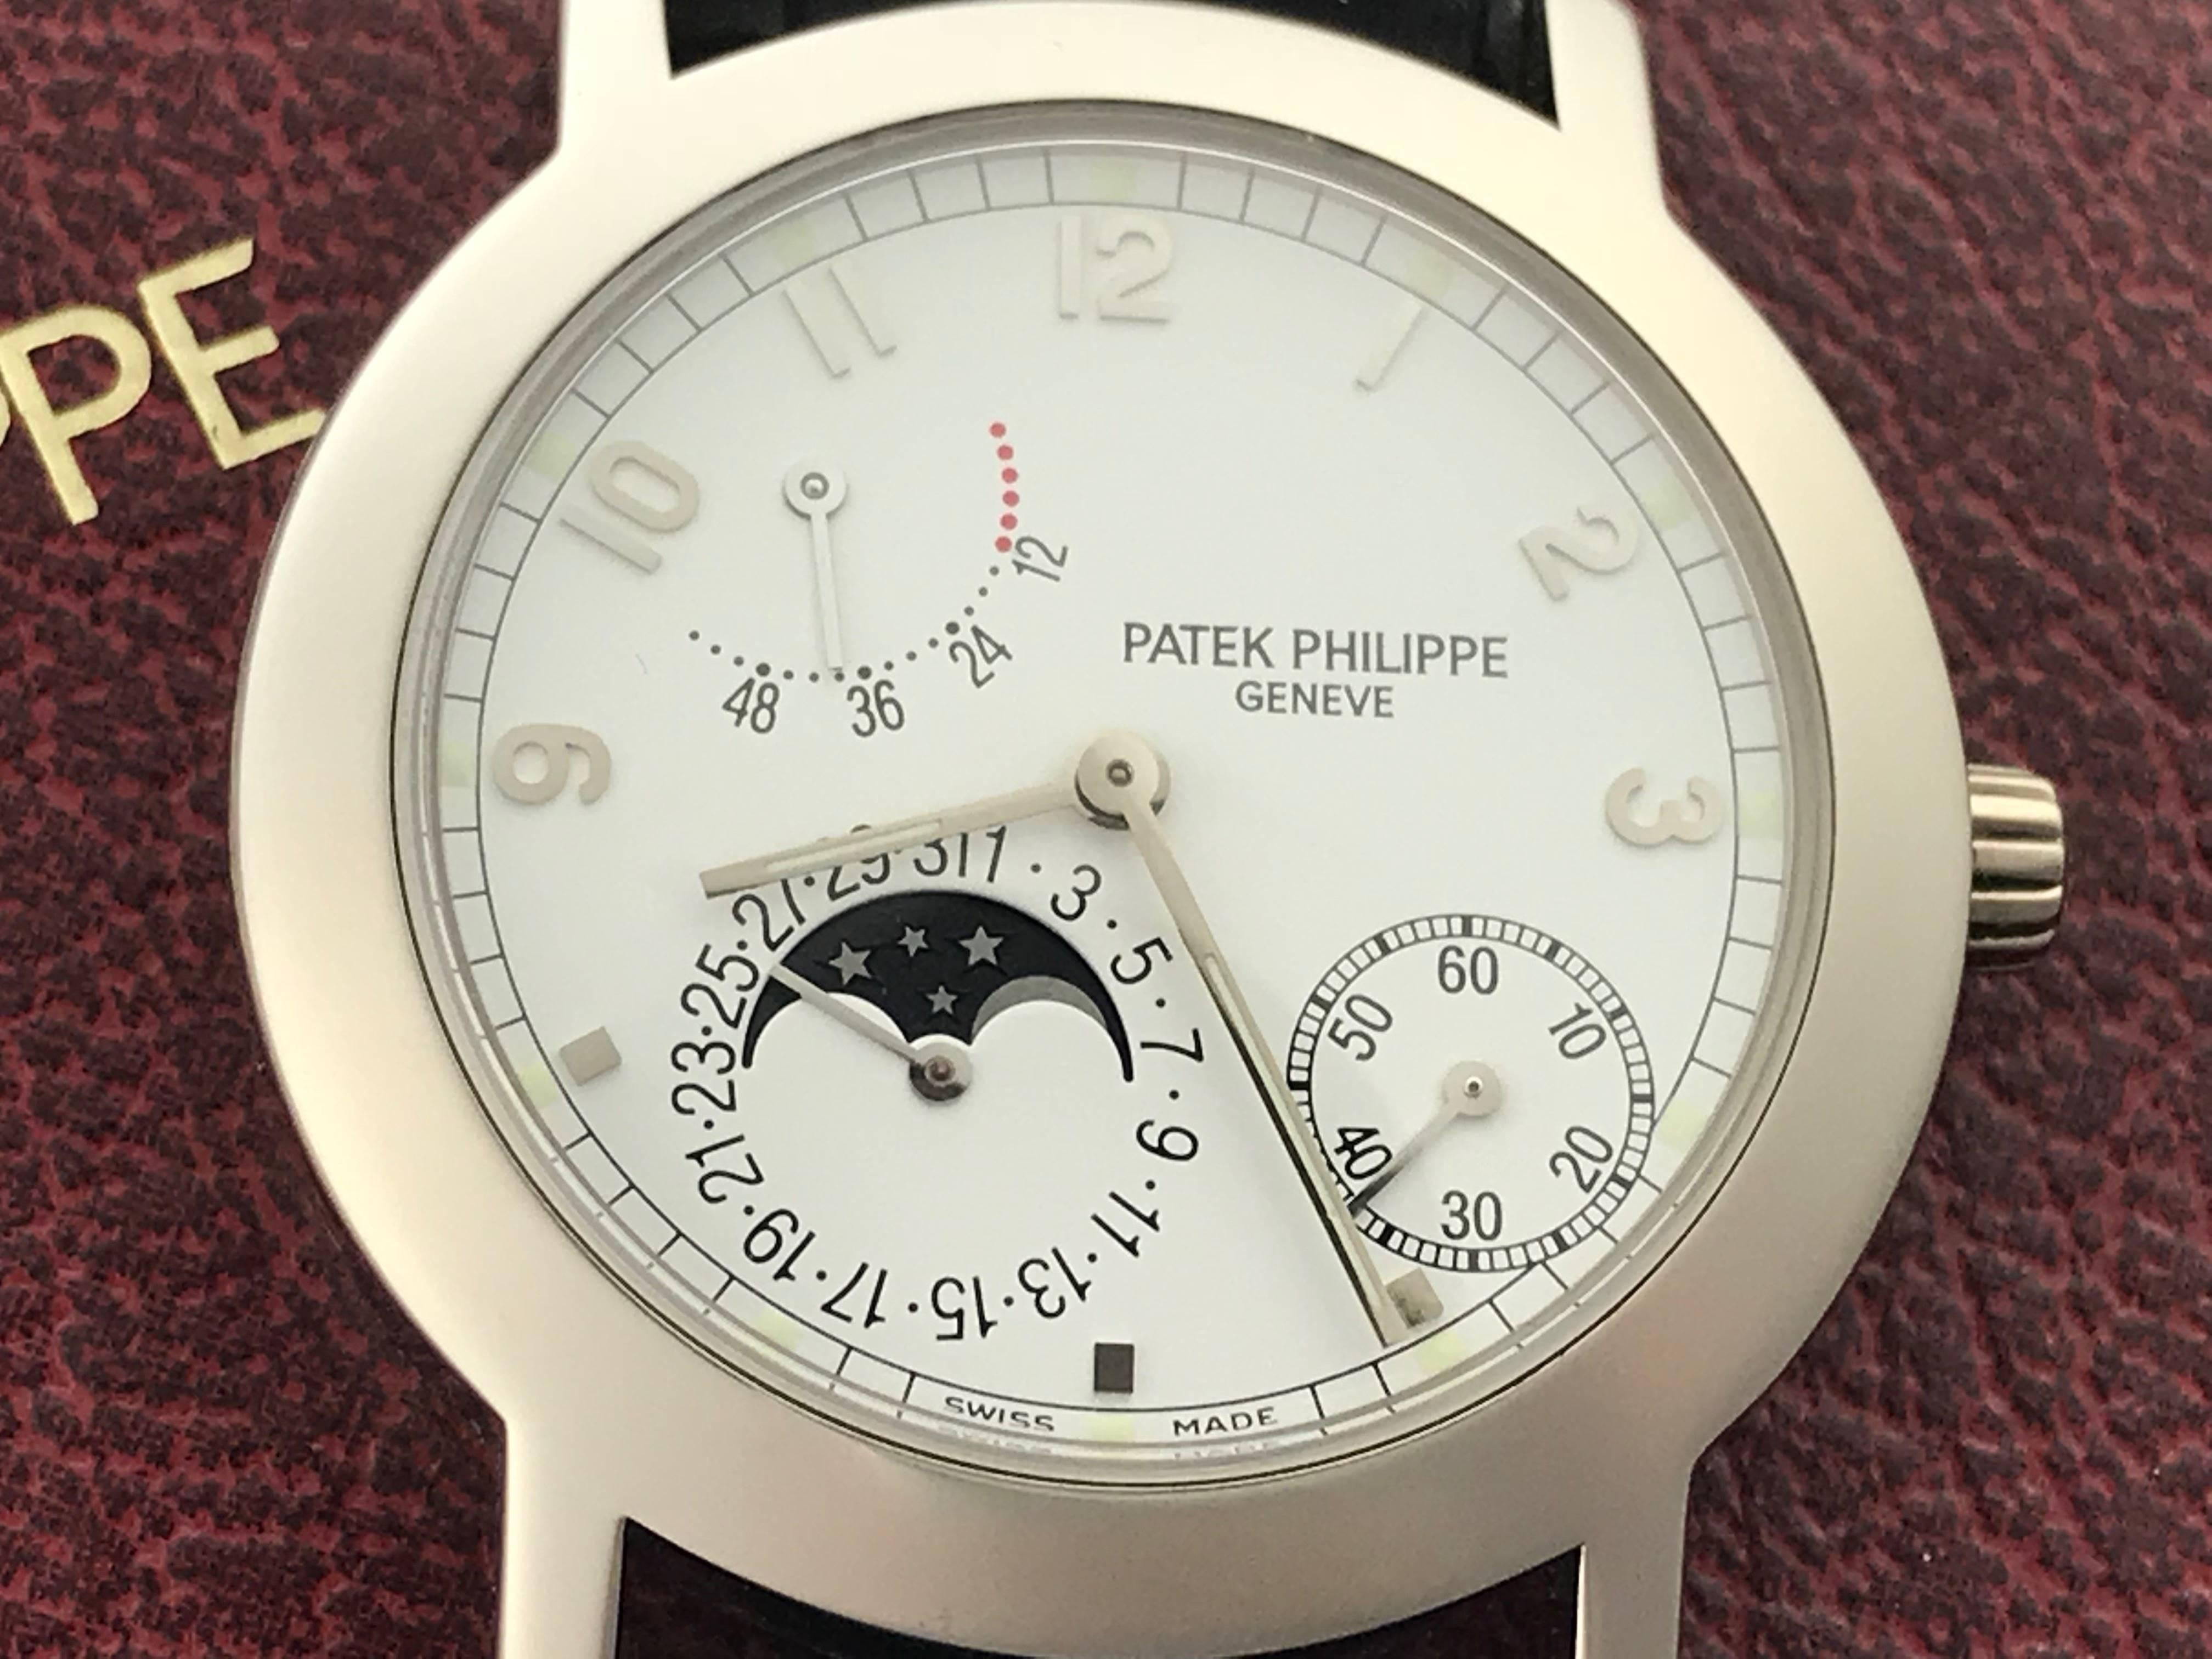 Patek Philippe 18k White Gold Moonphase Mens automatic wind Wrist Watch. Model 5055 G/001. Moonphase Date with Power Reserve Indicator and Off-set Constant Seconds. Patek Philippe Caliber 240/164.  18k White Gold case with exposition back to view